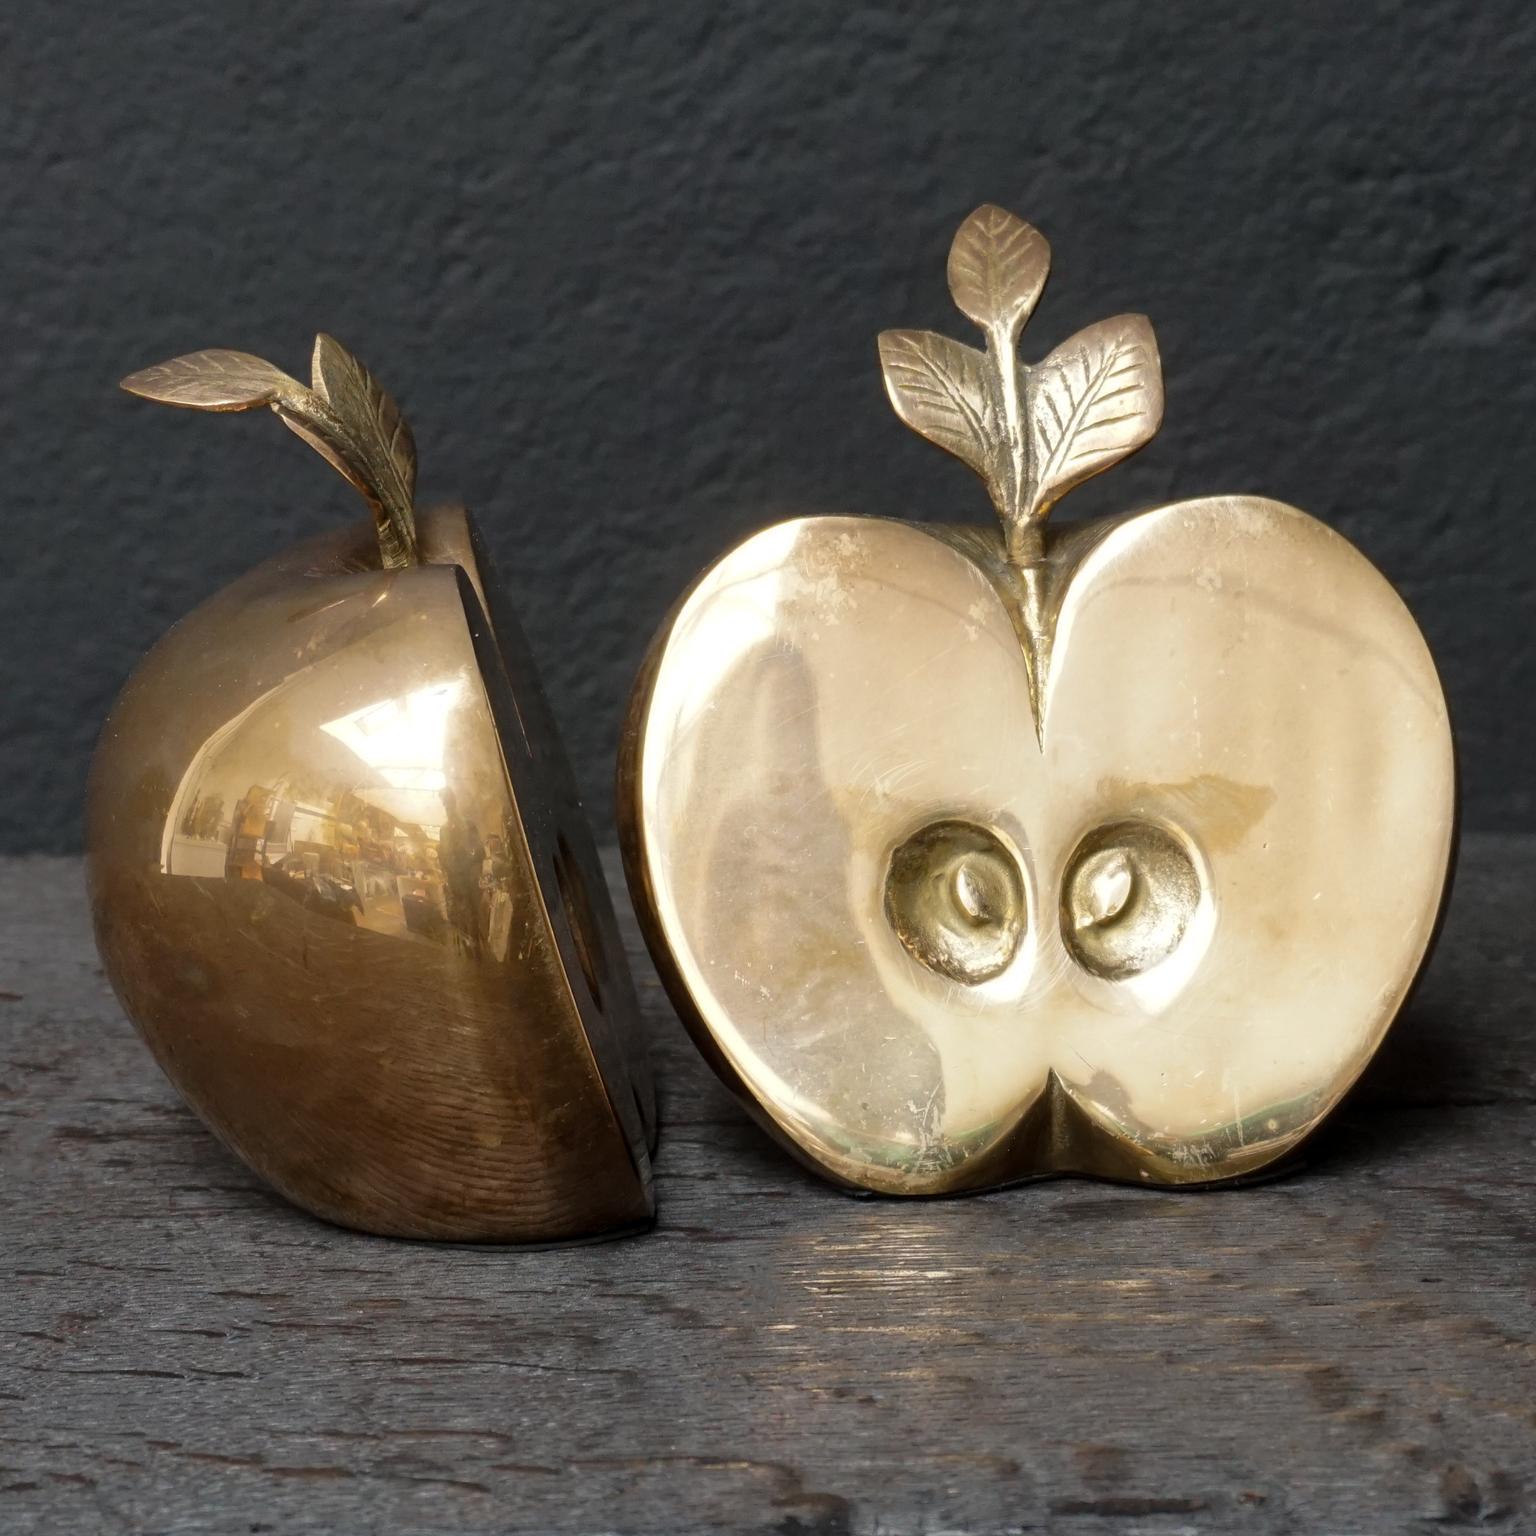 Hollywood Regency 1950s Brass Apple Bookends or Paperweights